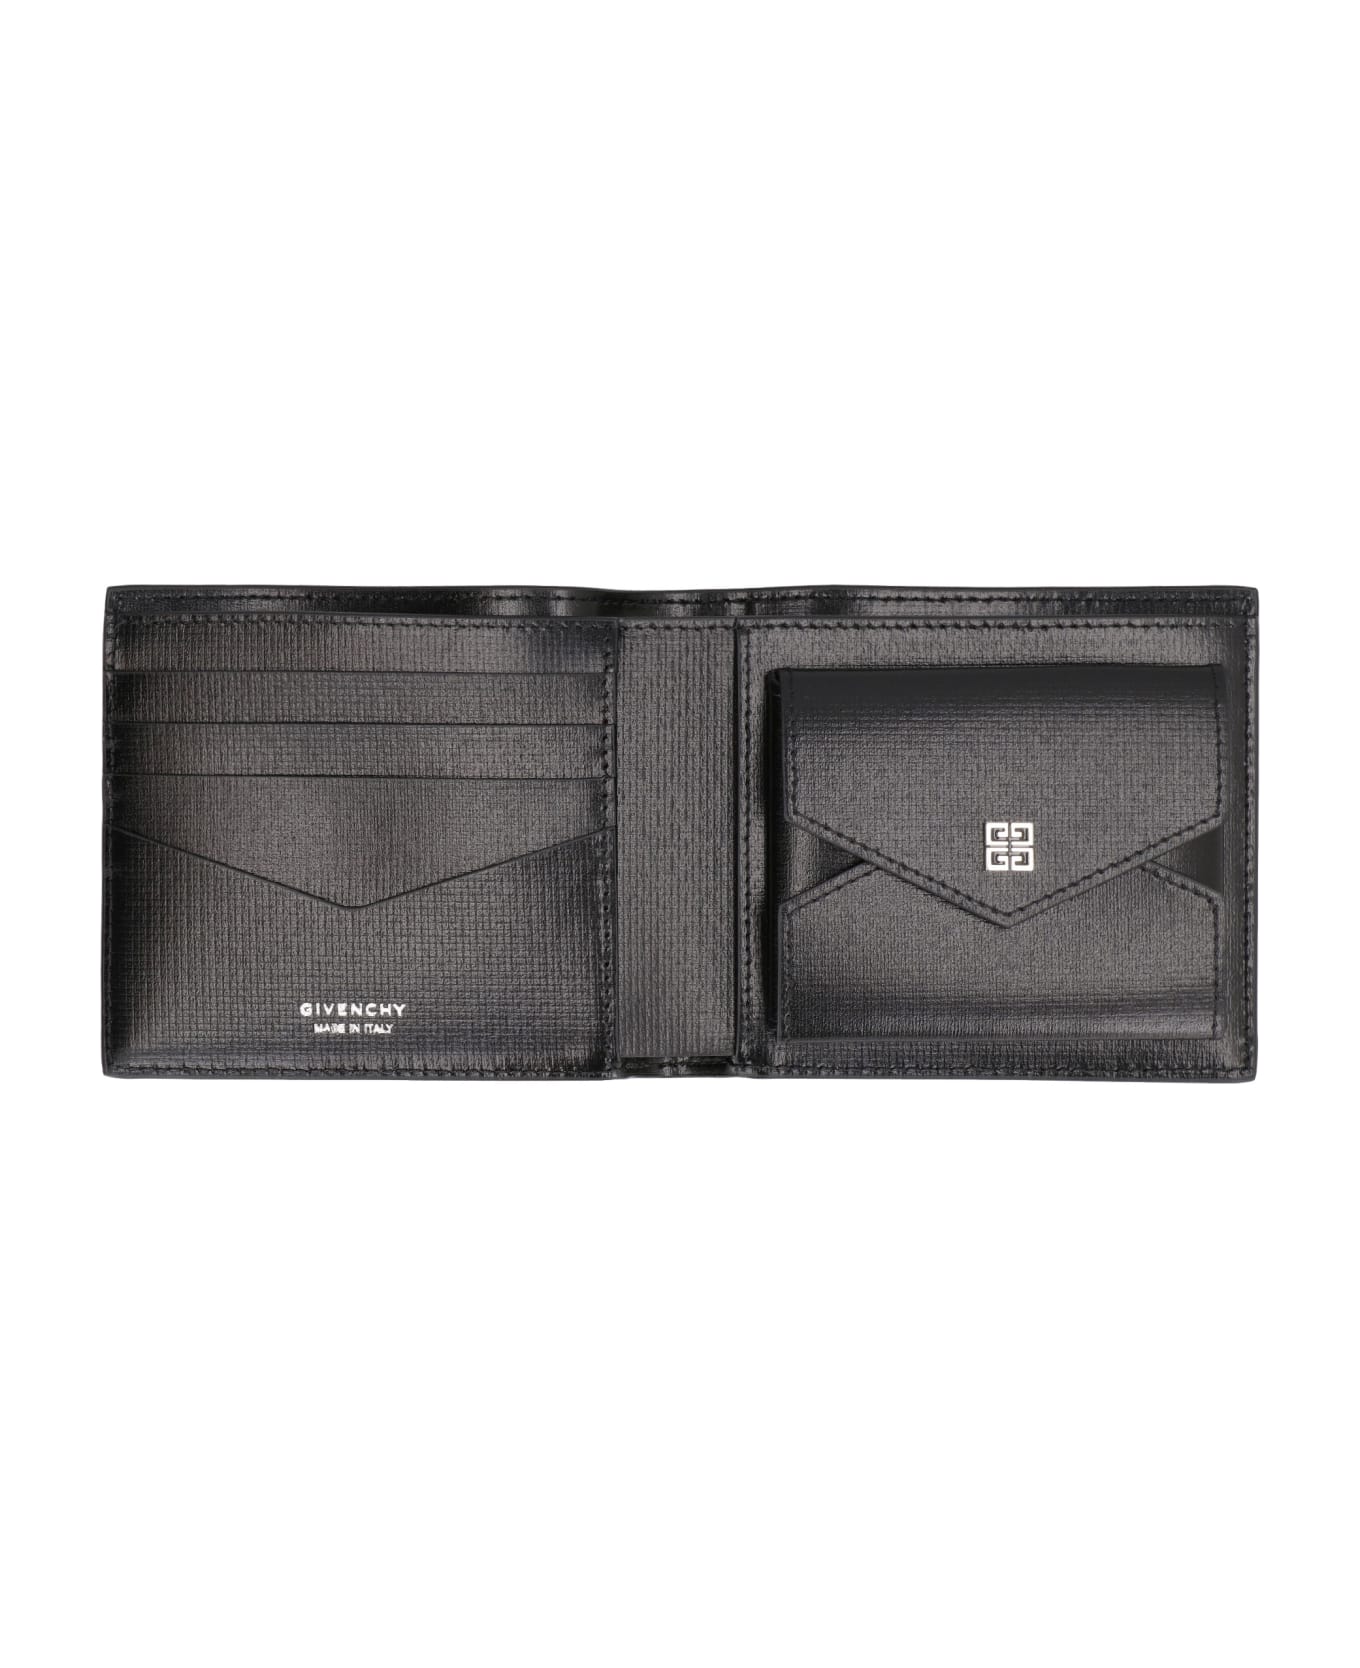 Givenchy Logo Leather Wallet - black 財布